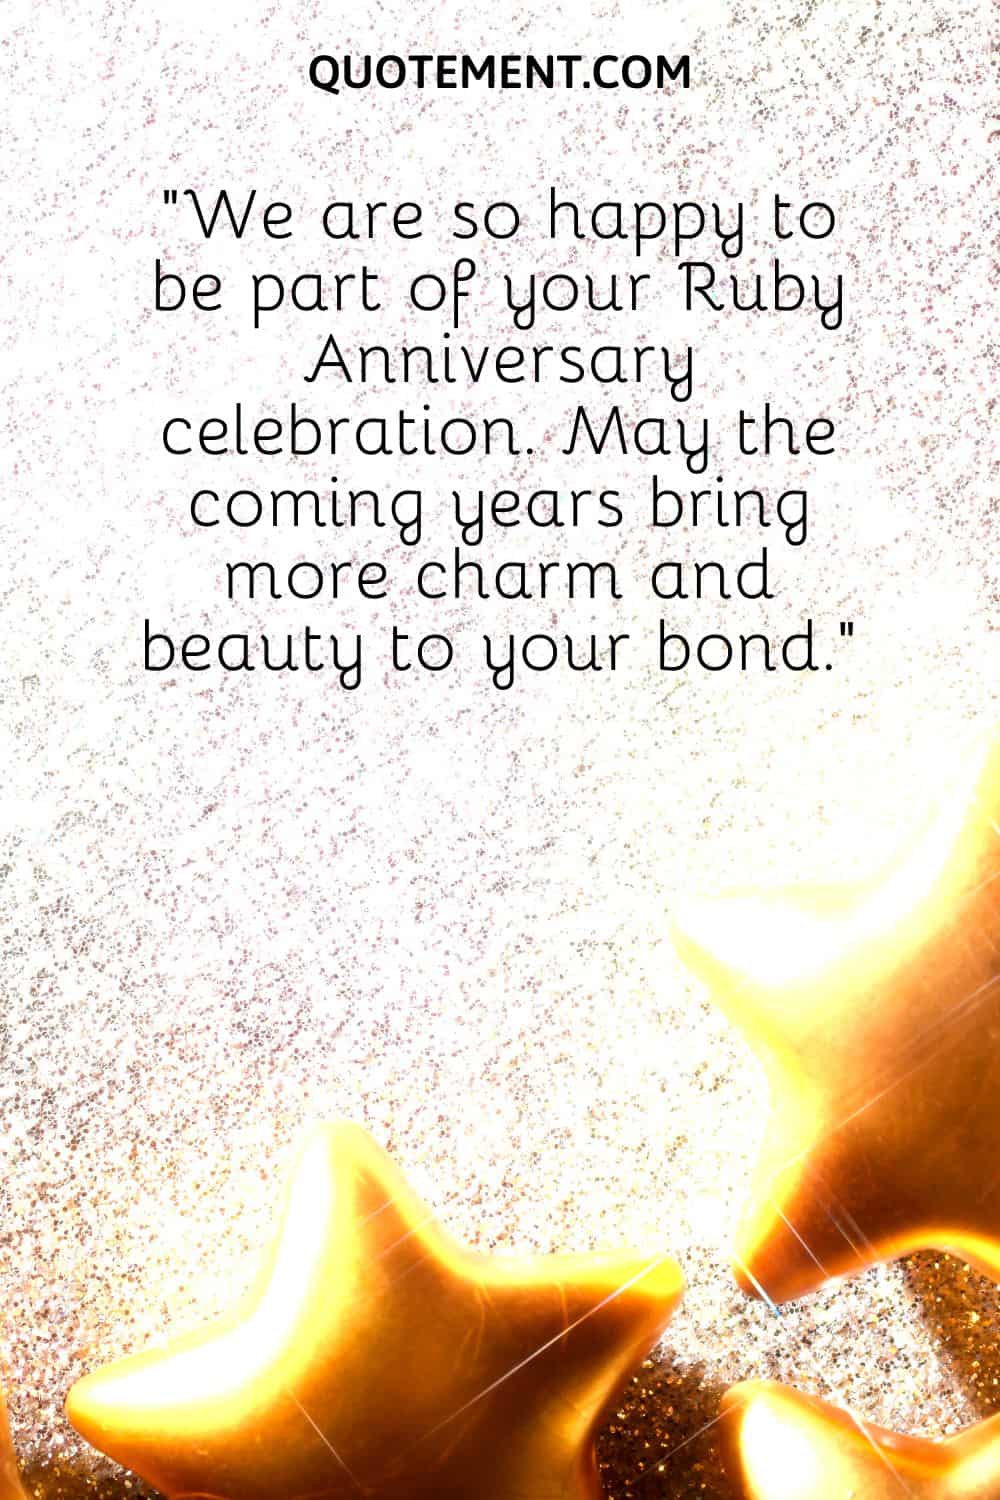 We are so happy to be part of your Ruby Anniversary celebration